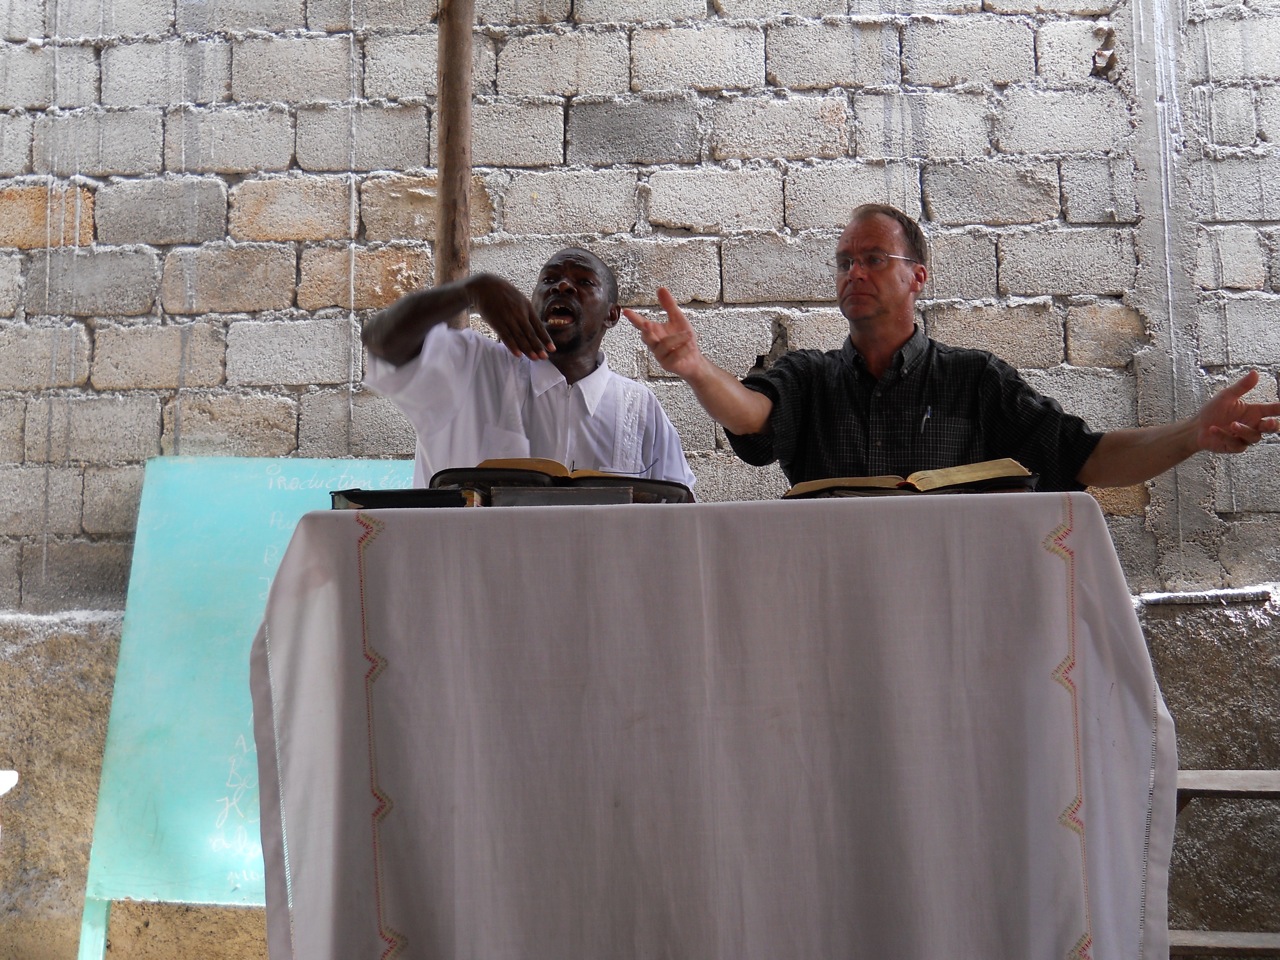 Pastor Training and a Water Project